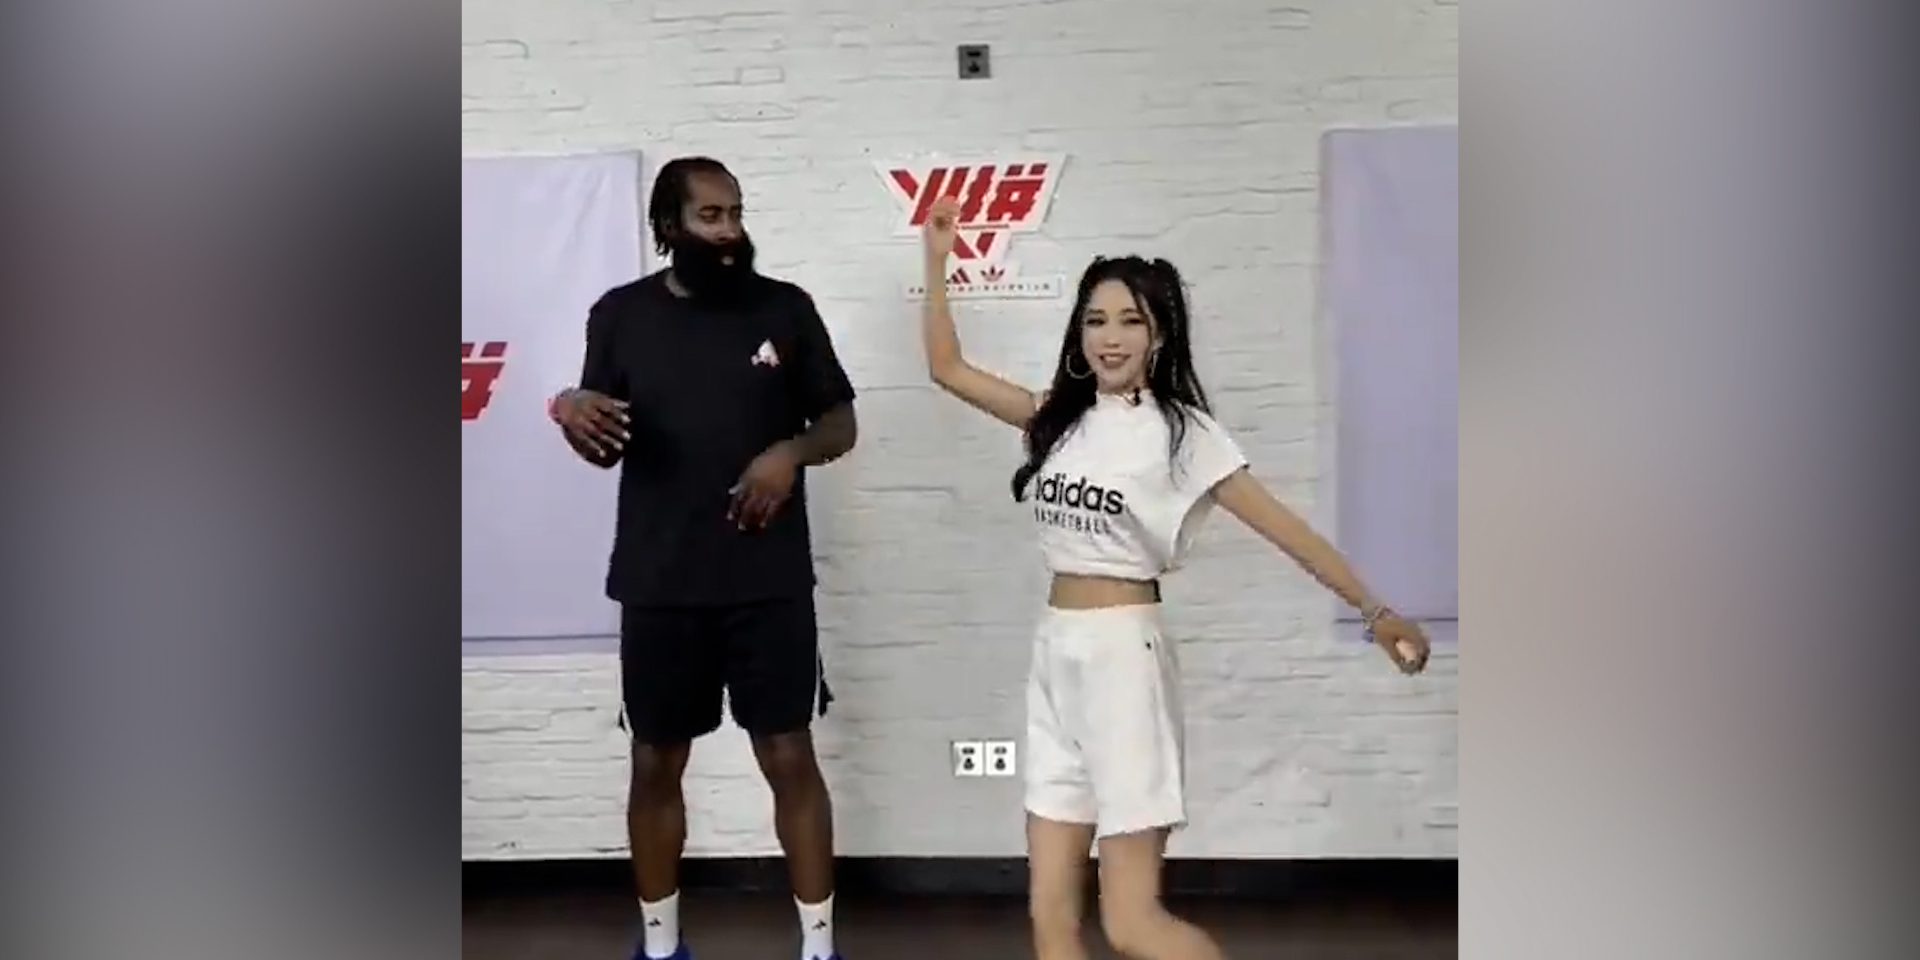 James Harden unleashes his" super electric" dance moves during China visit